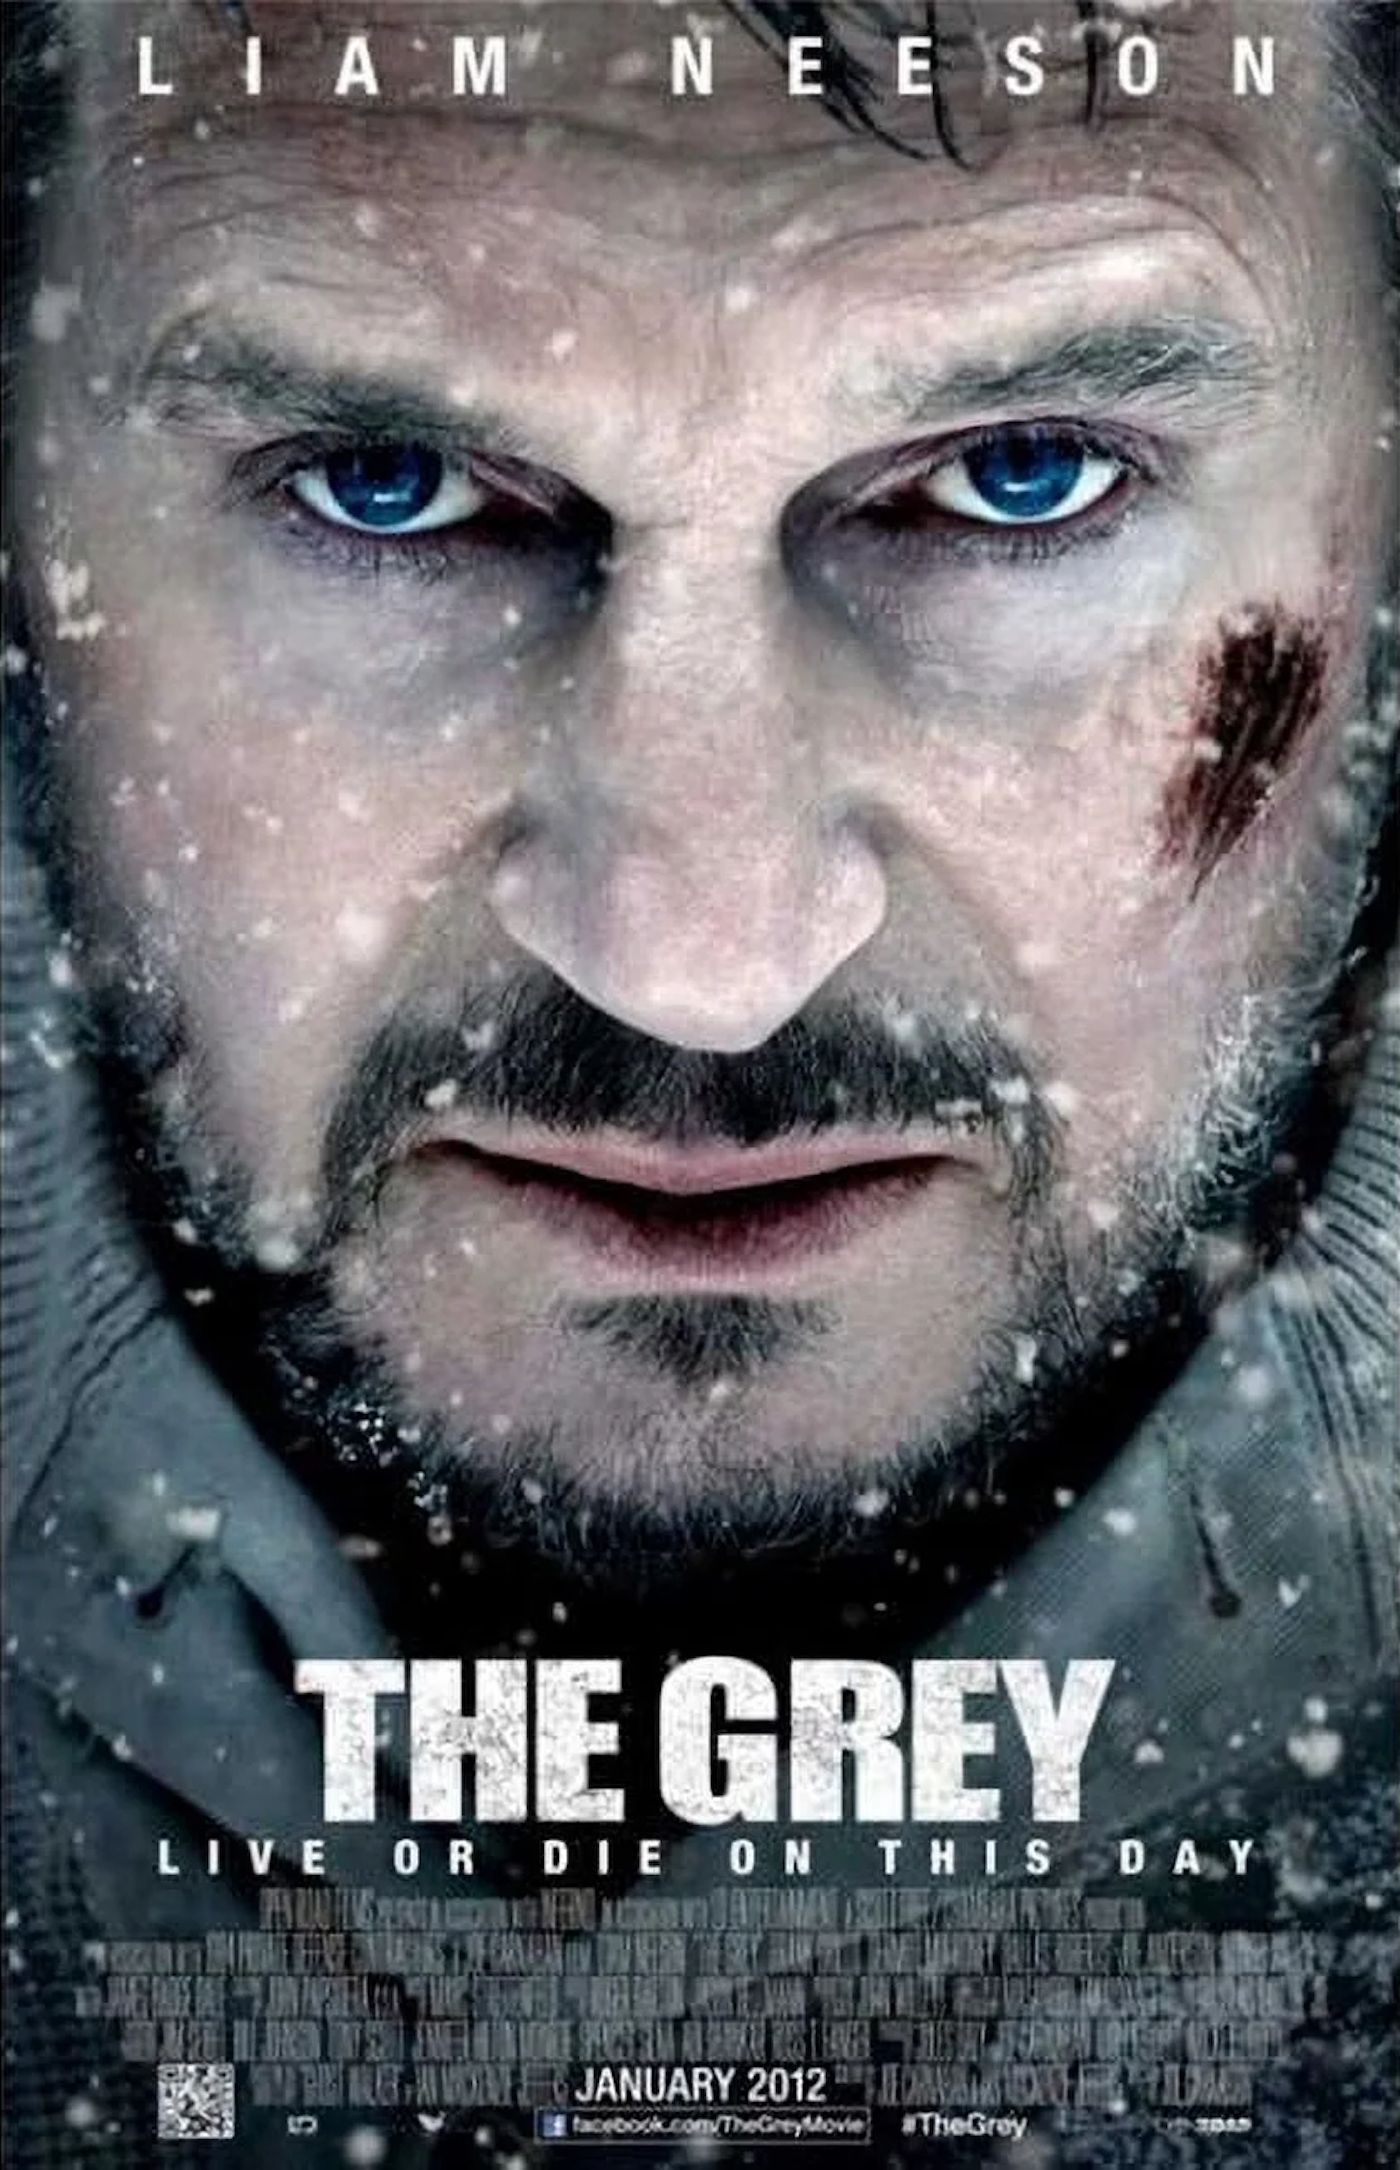 Liam Neeson on The Grey movie poster